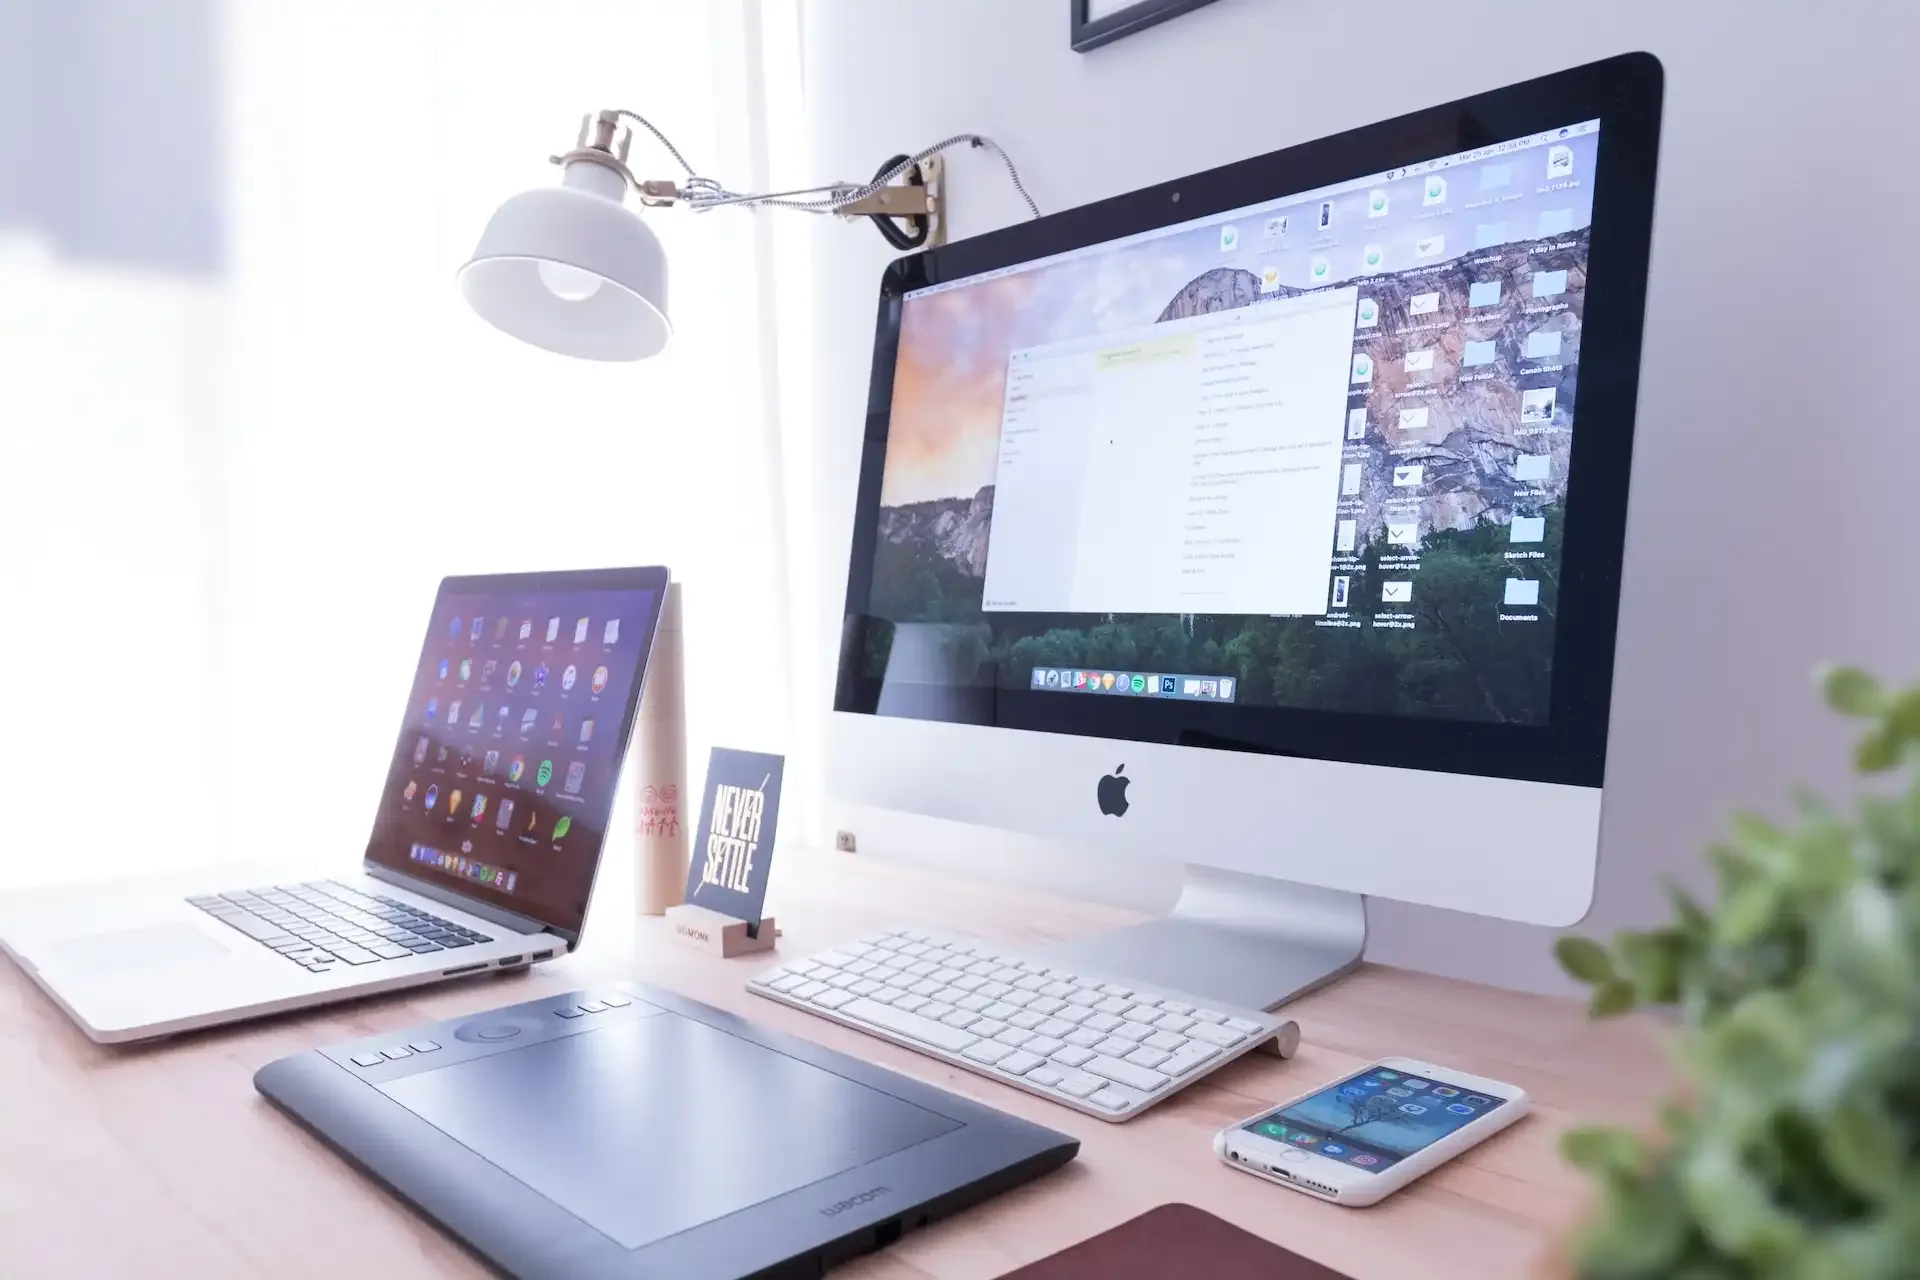 An Apple setup with an iMac and an AirBook